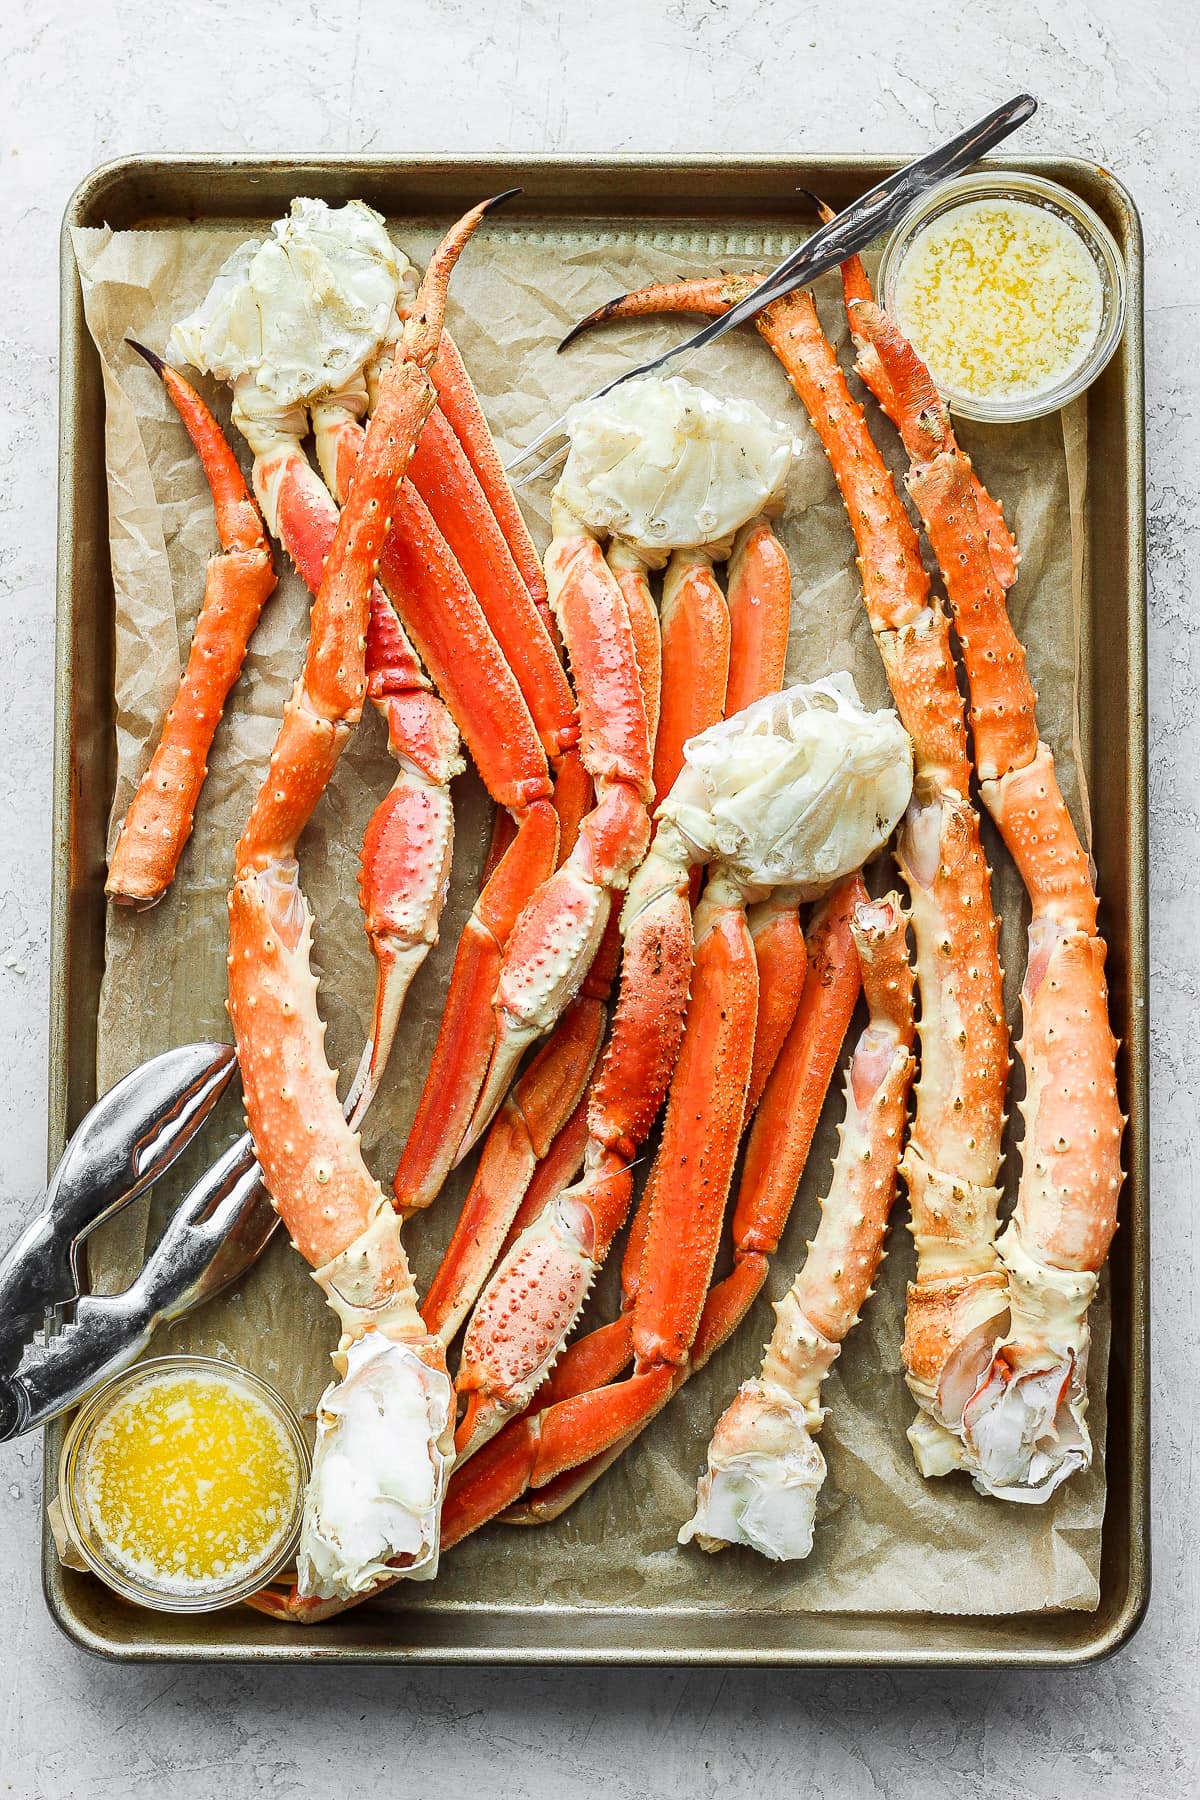 Parchment lined baking sheet filled with show crab and king crab legs as well as some bowls of ghee. 